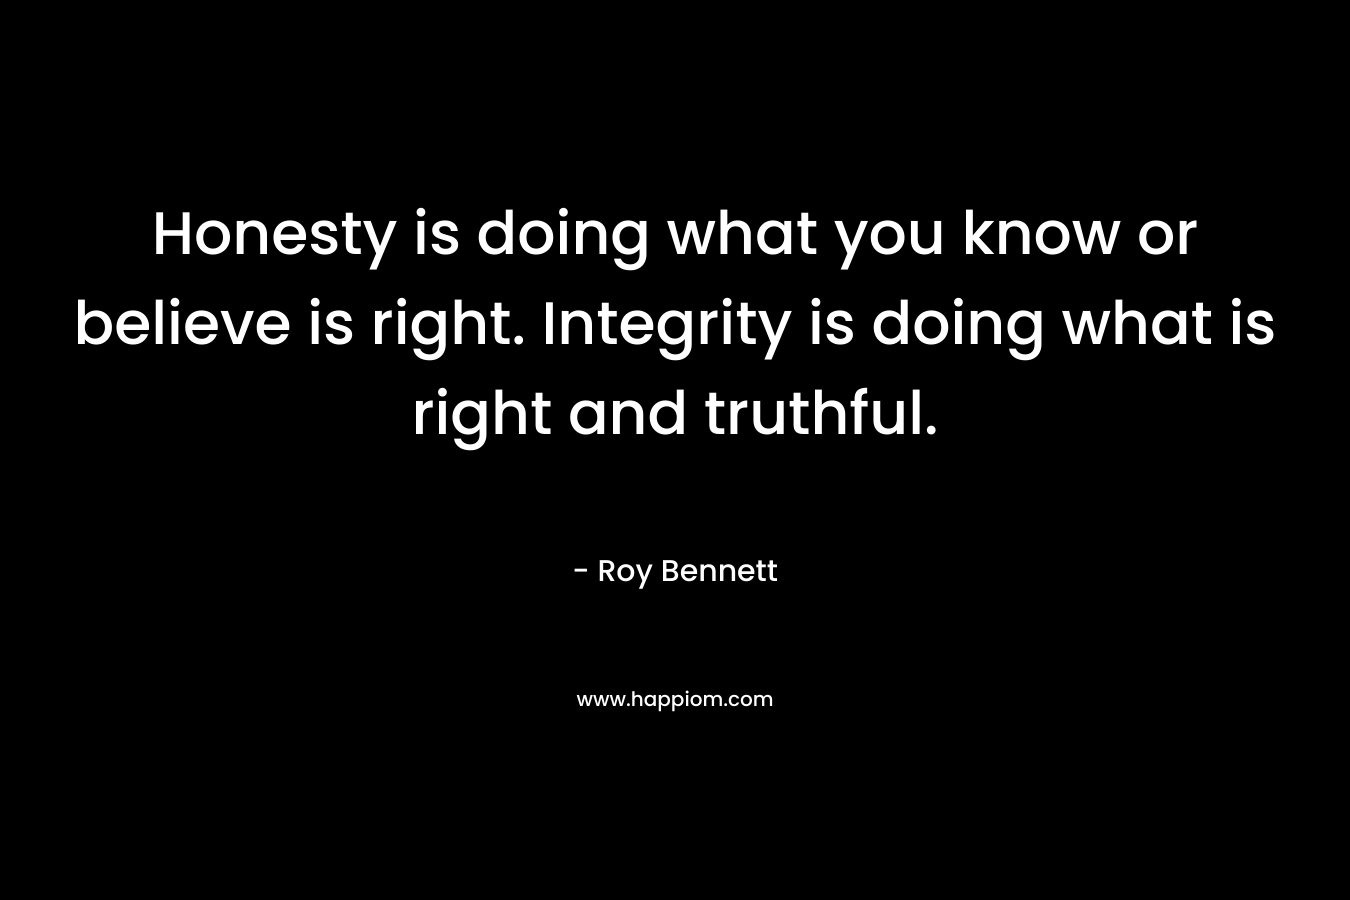 Honesty is doing what you know or believe is right. Integrity is doing what is right and truthful.